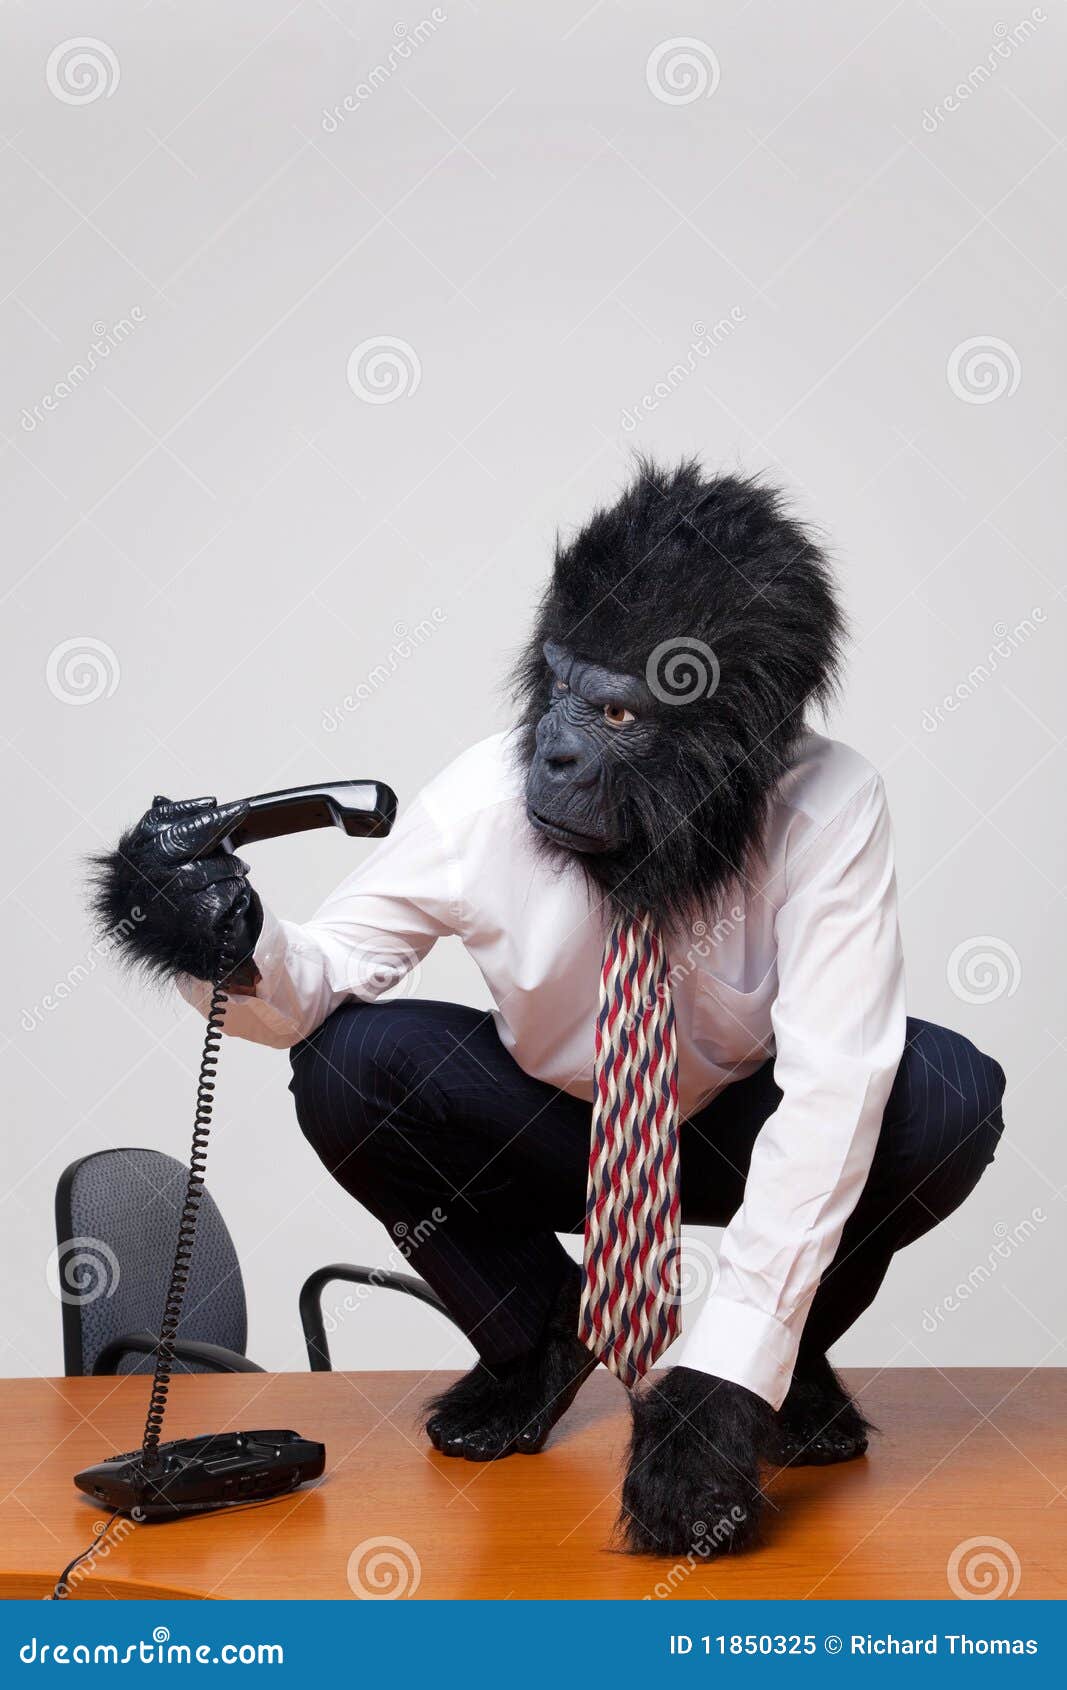 gorilla on a desk picking up the phone.